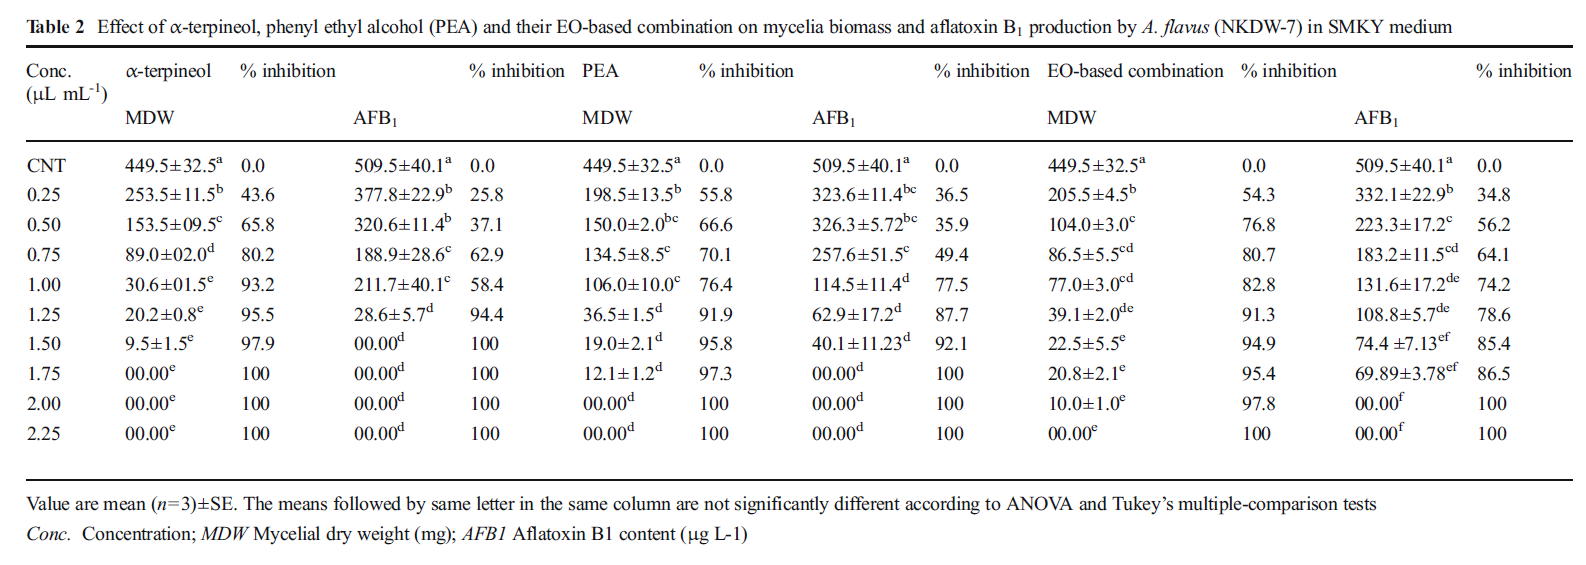 Table 2 Effect of α-terpineol, phenyl ethyl alcohol (PEA) and their EO-based combination on mycelia biomass and aflatoxin B1 production by A. flavus (NKDW-7) in SMKY medium